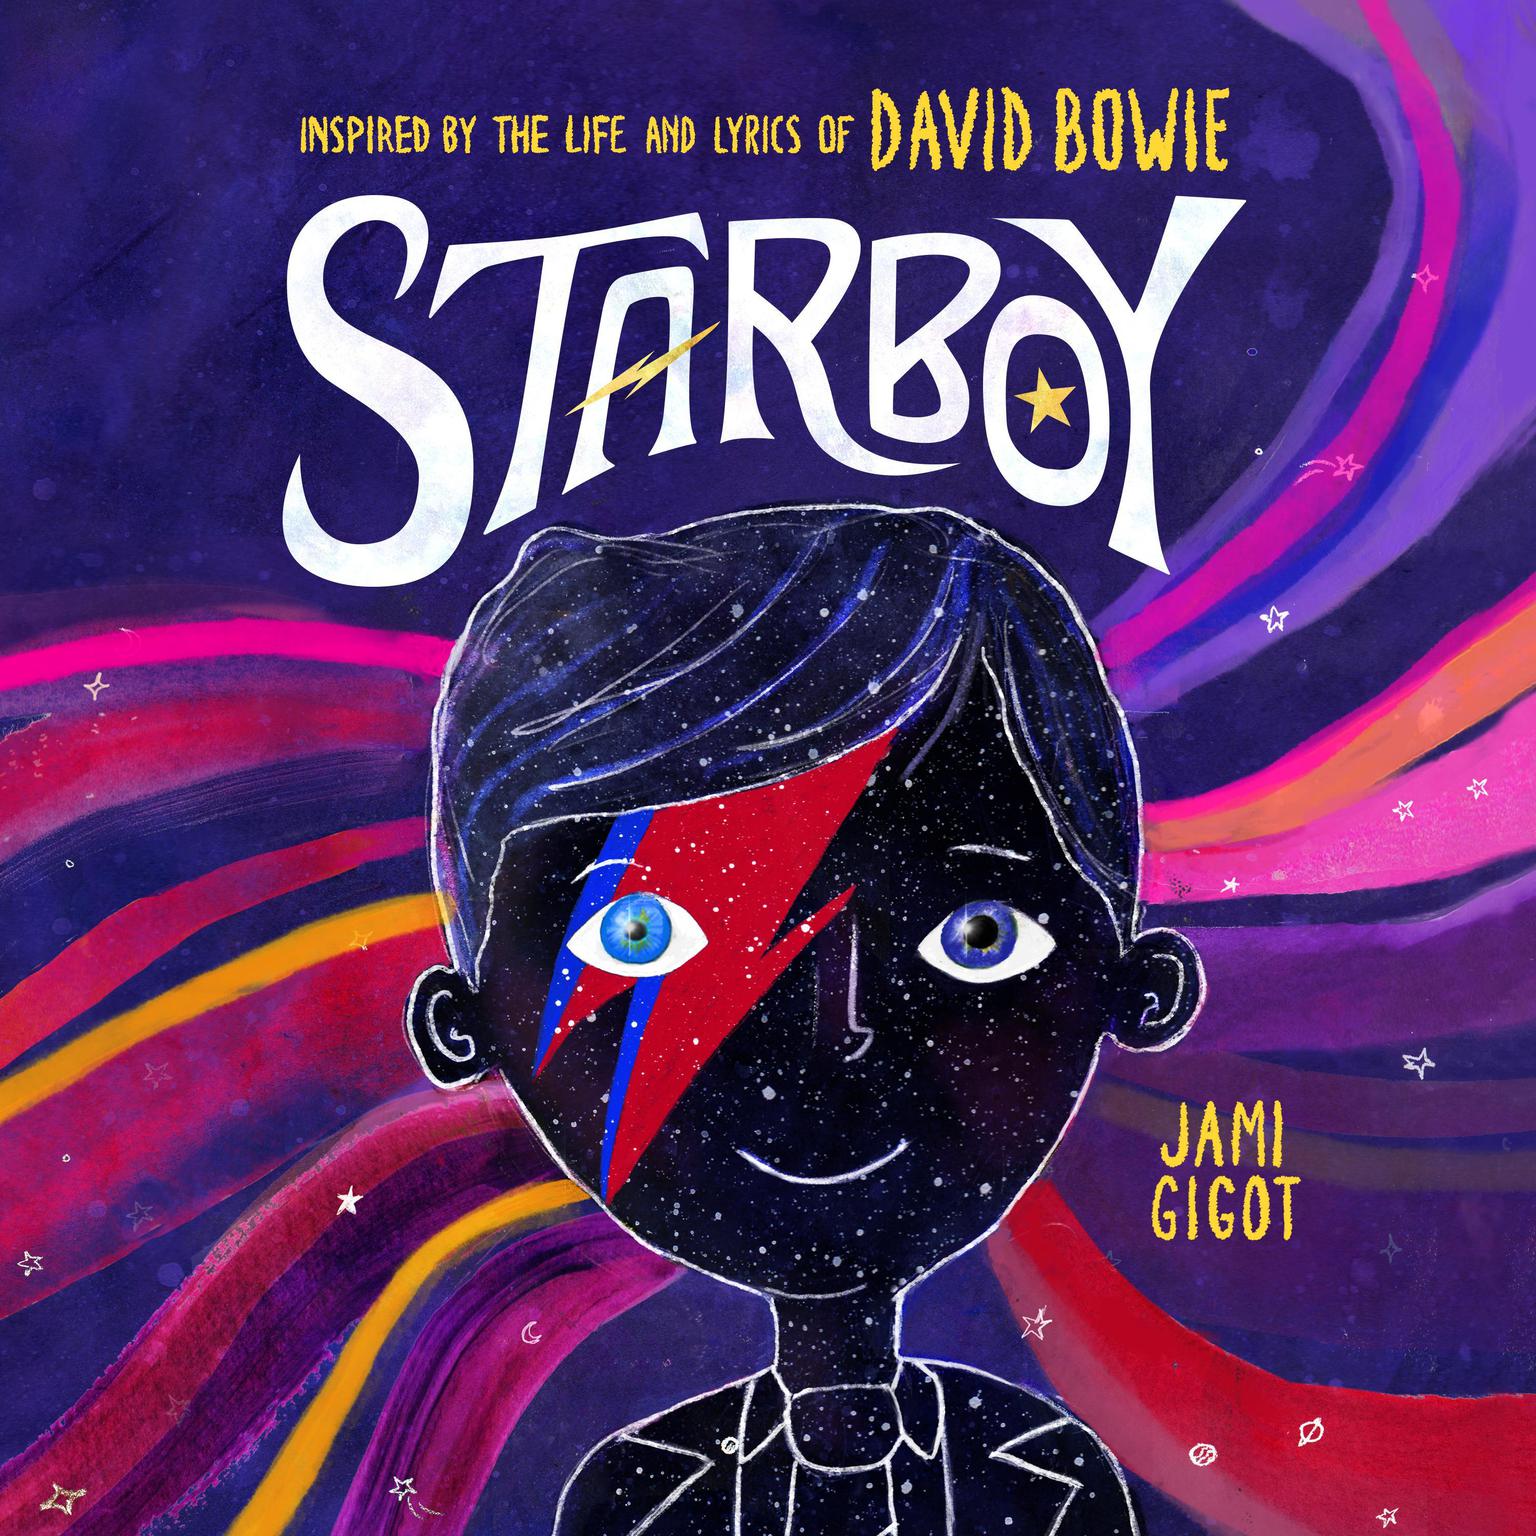 Starboy: Inspired by the Life and Lyrics of David Bowie Audiobook, by Jami Gigot